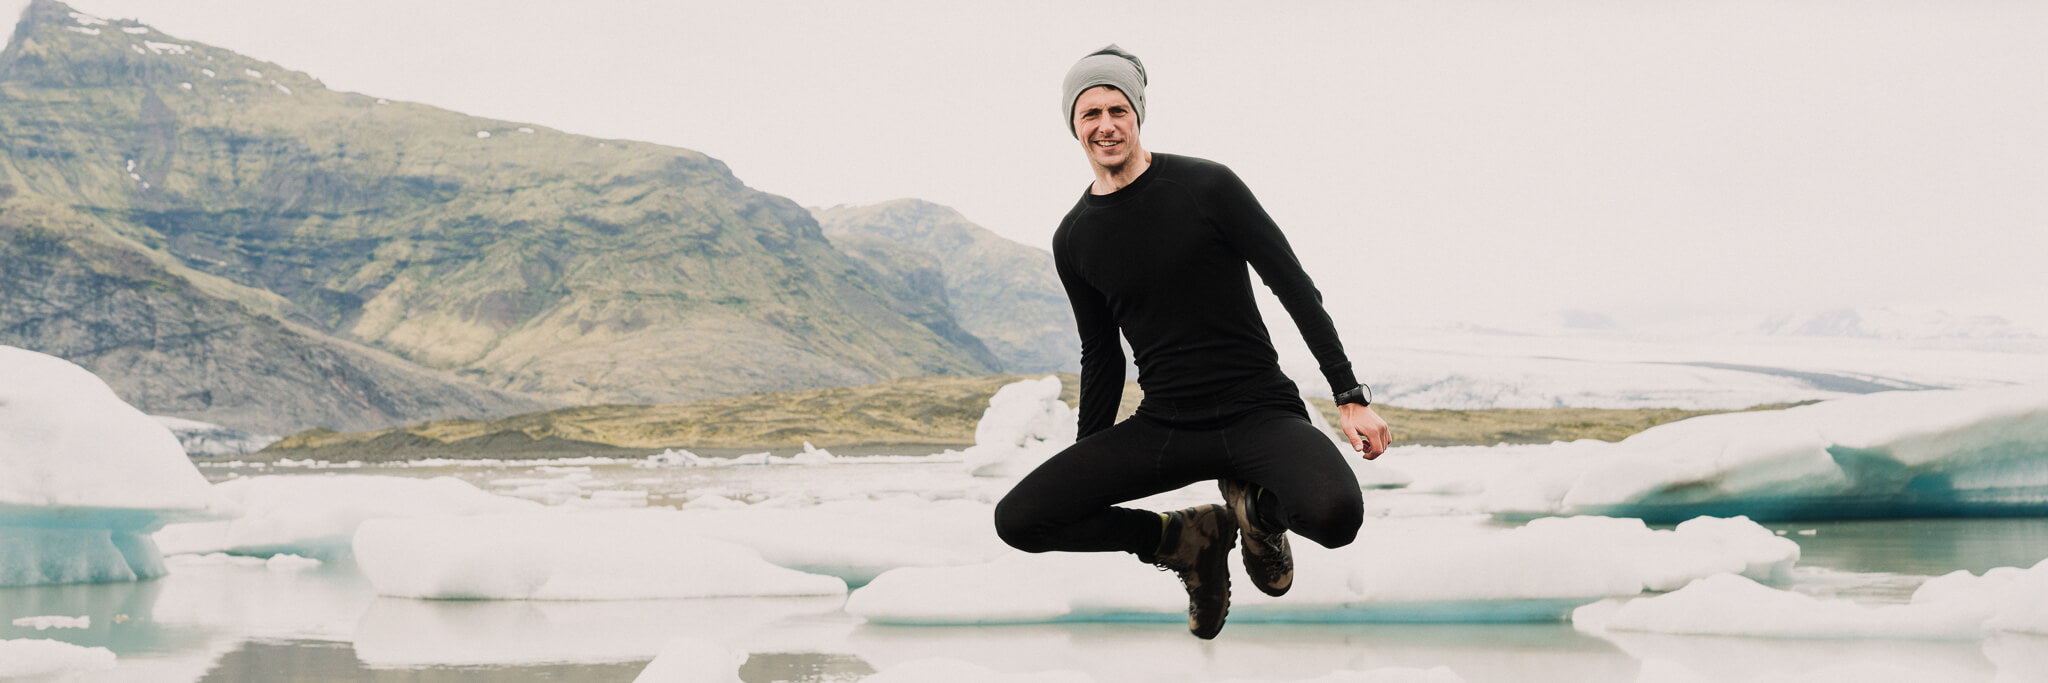 a-man-with-black-thermal-shirt-and-pants-jumped-in-the-air-at-winter